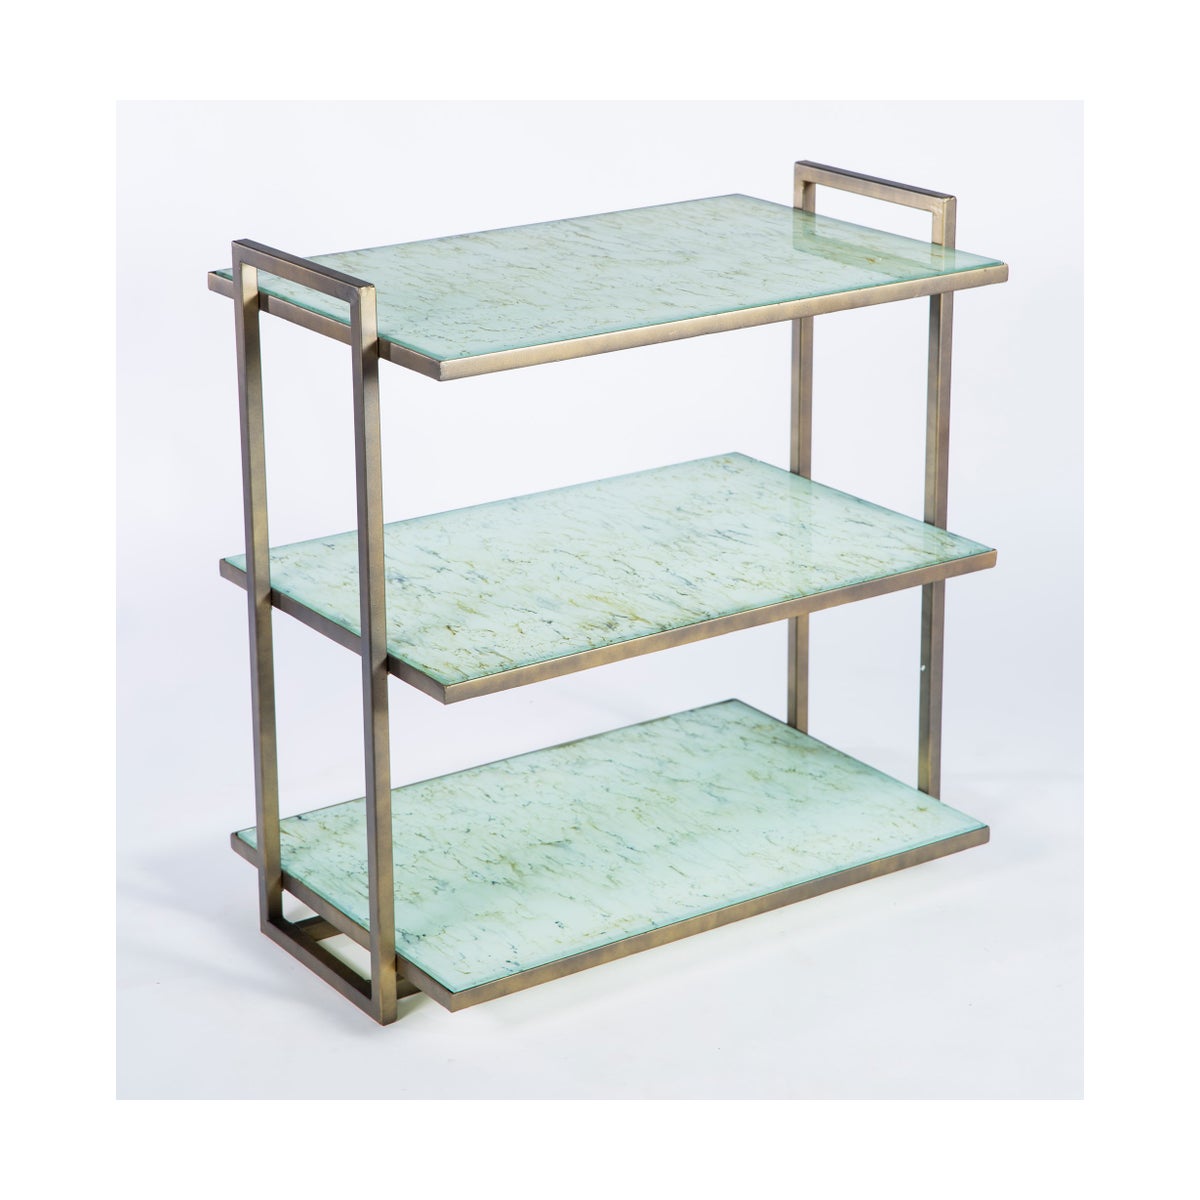 Windham 3 Tier Shelf in Antique Silver with Glass Shelves in Wrinkled